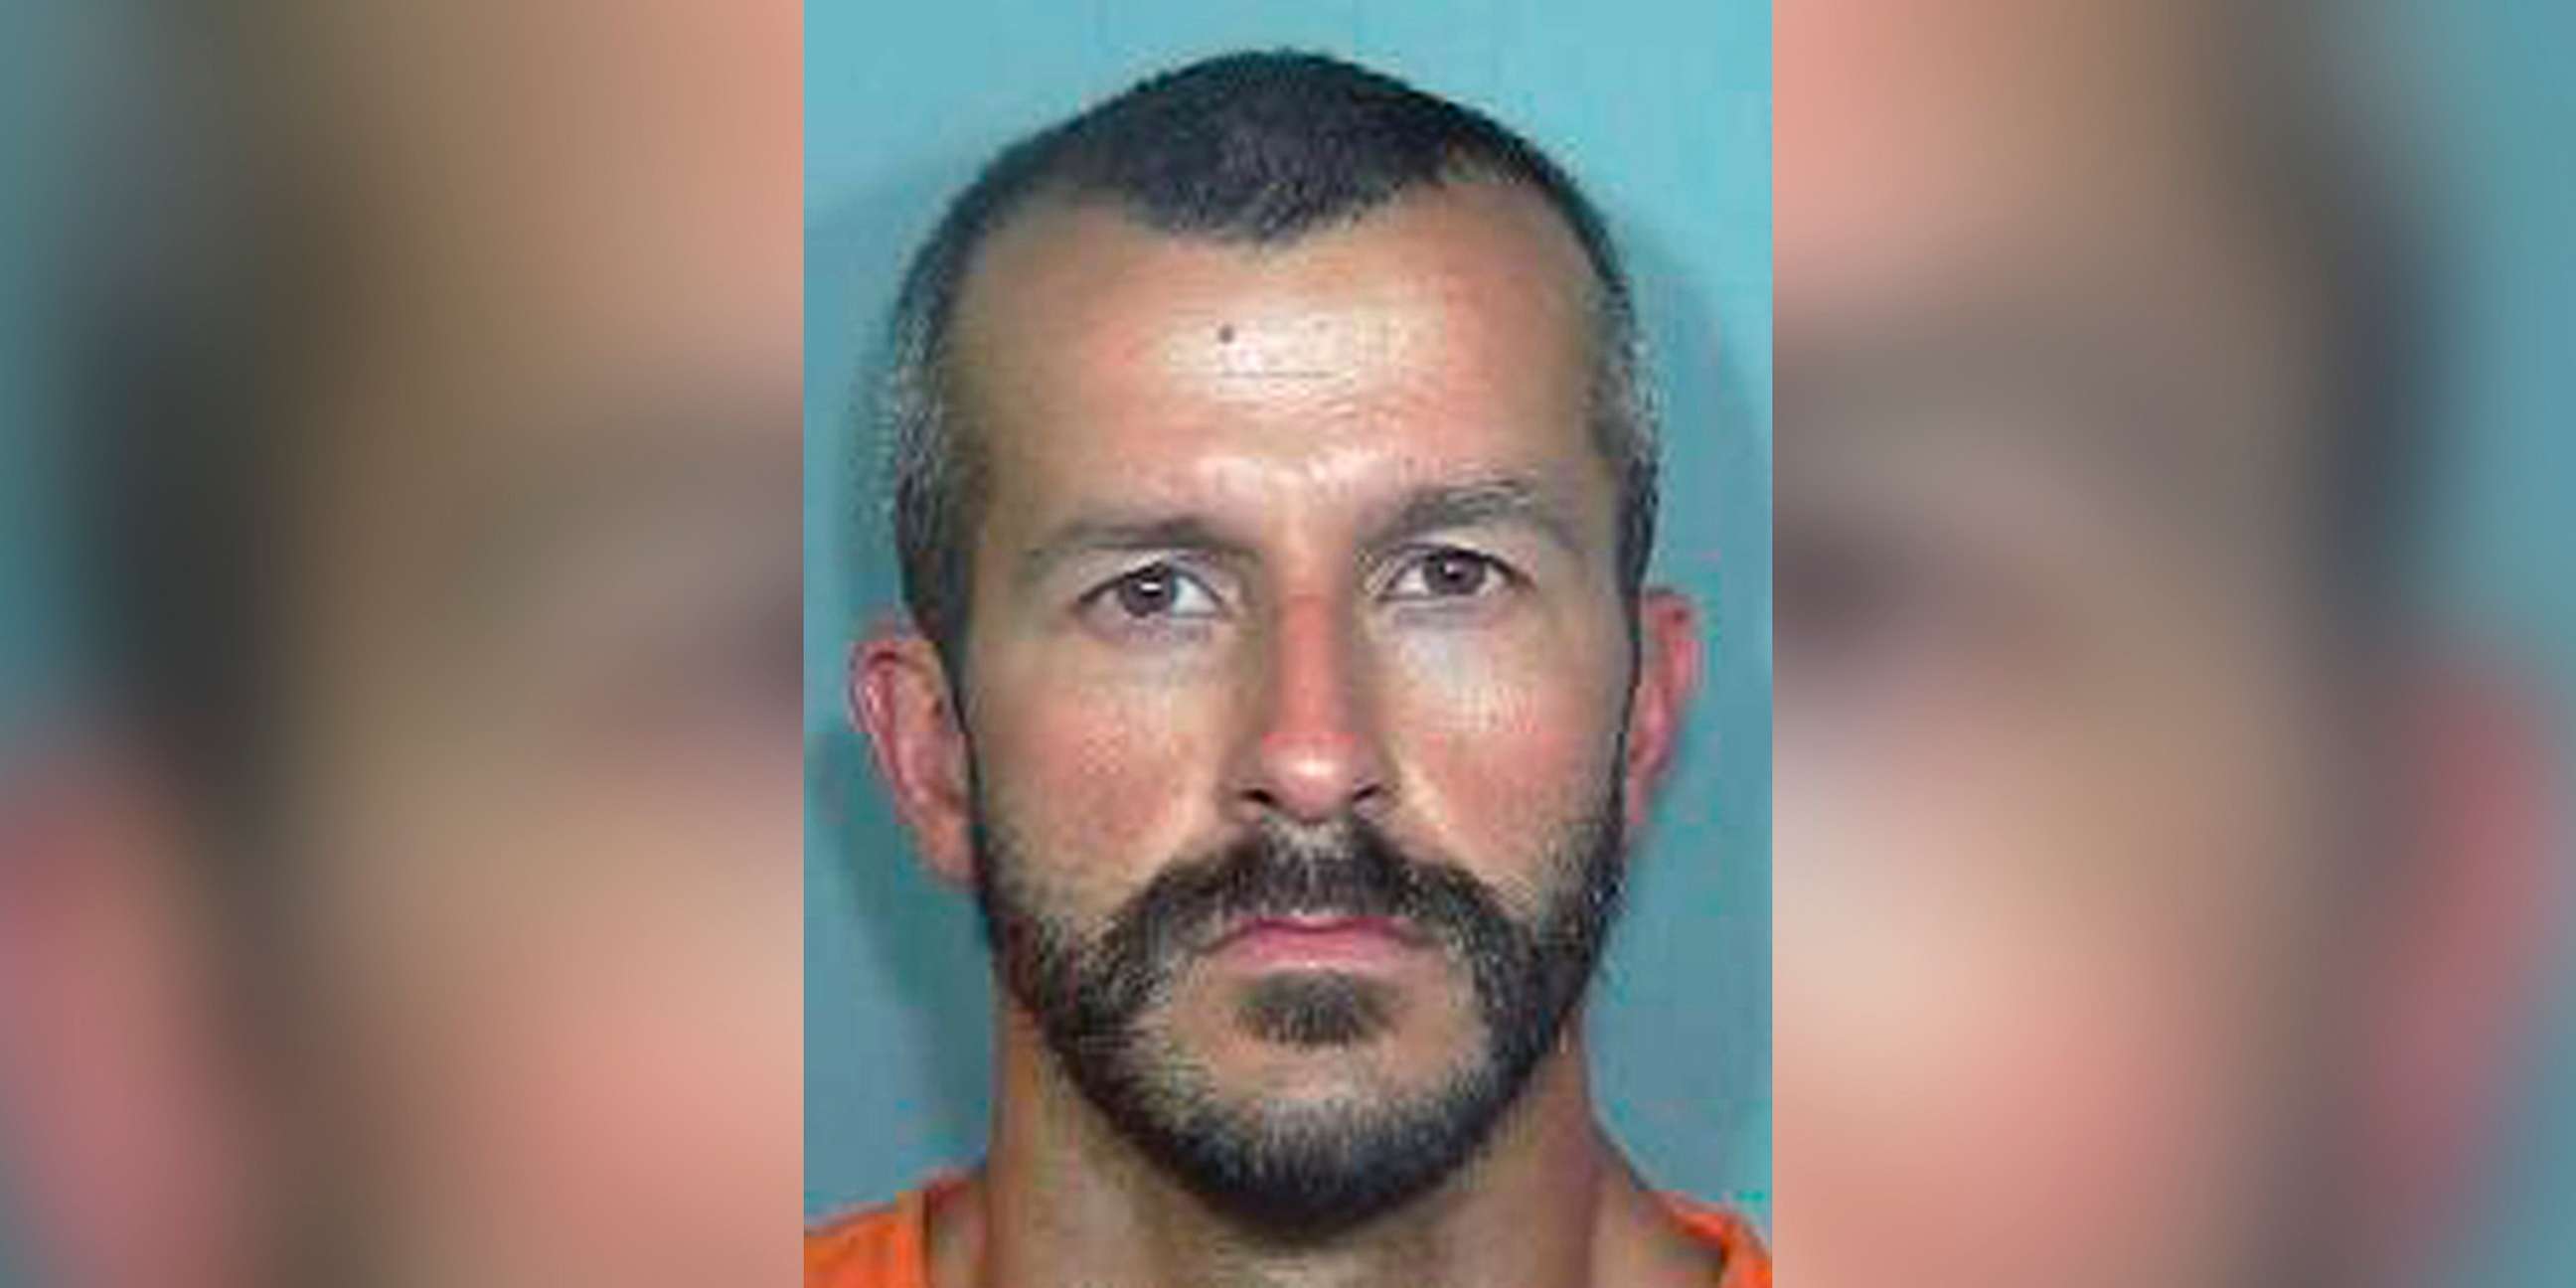 PHOTO: Christopher Watts is accused of killing his wife and two daughters in Colorado.  Watt's pregnant wife, 34-year-old Shanann Watts, and their two daughters, 4-year-old Bella and 3-year-old Celeste were reported missing on Aug. 13, 2018.